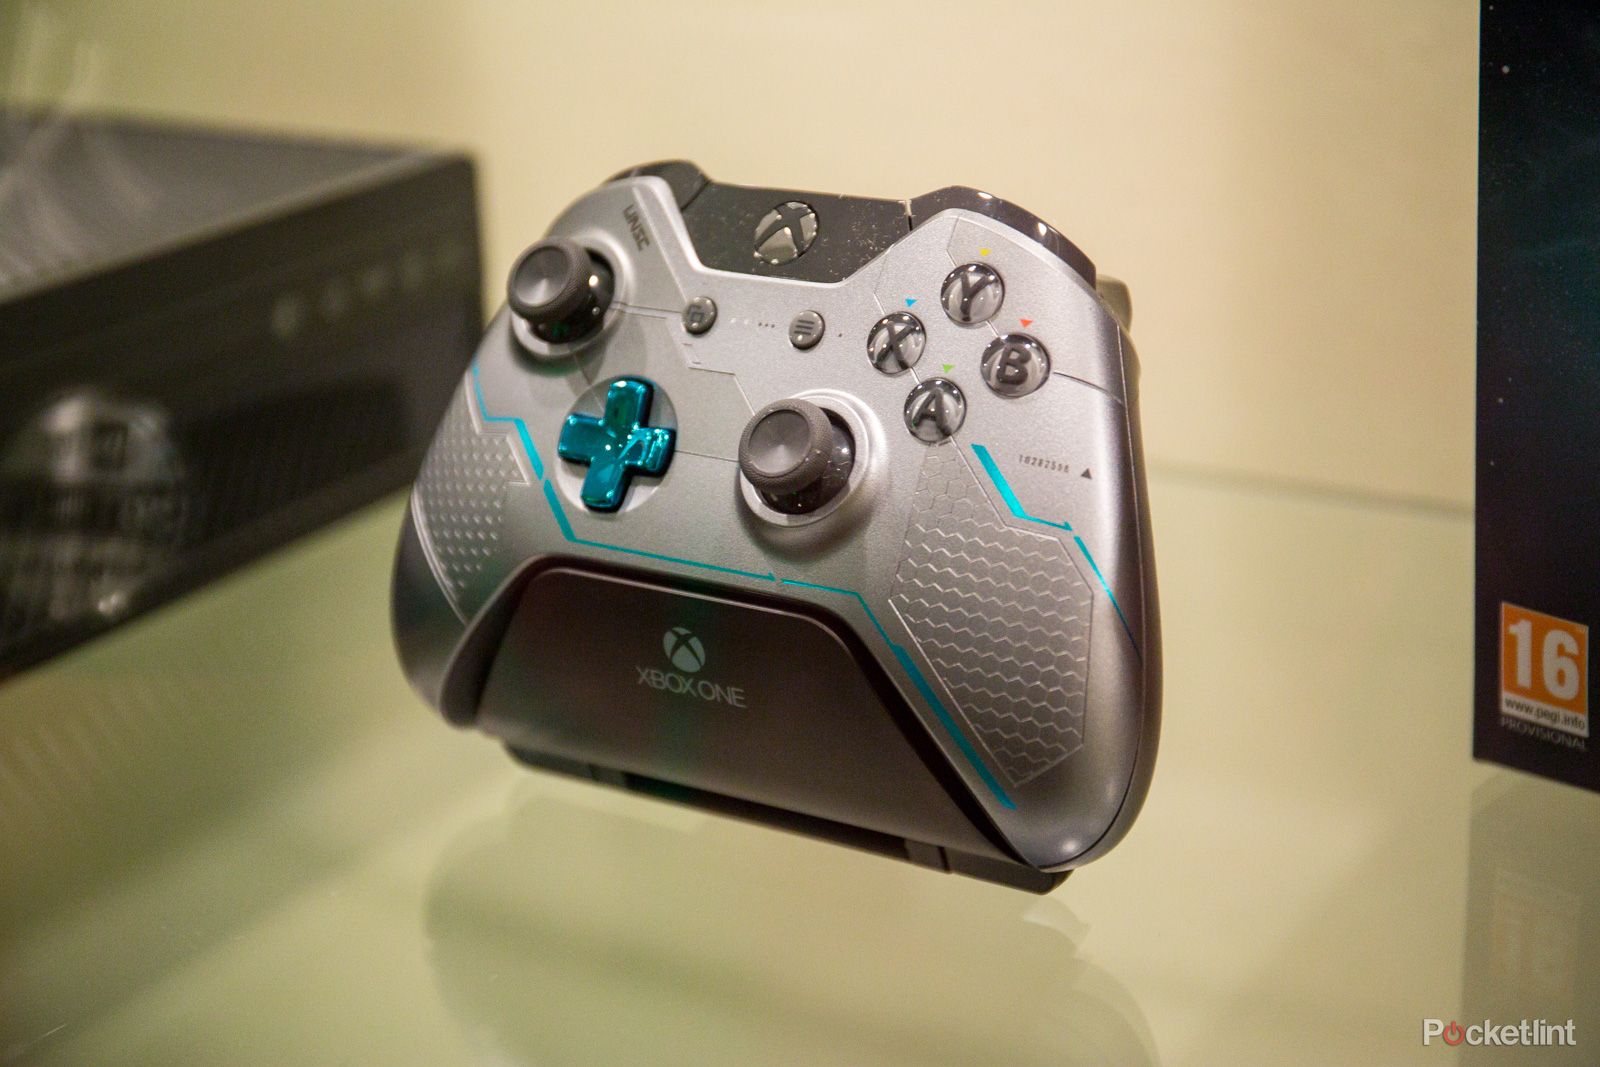 halo 5 limited edition xbox one controllers now available image 1